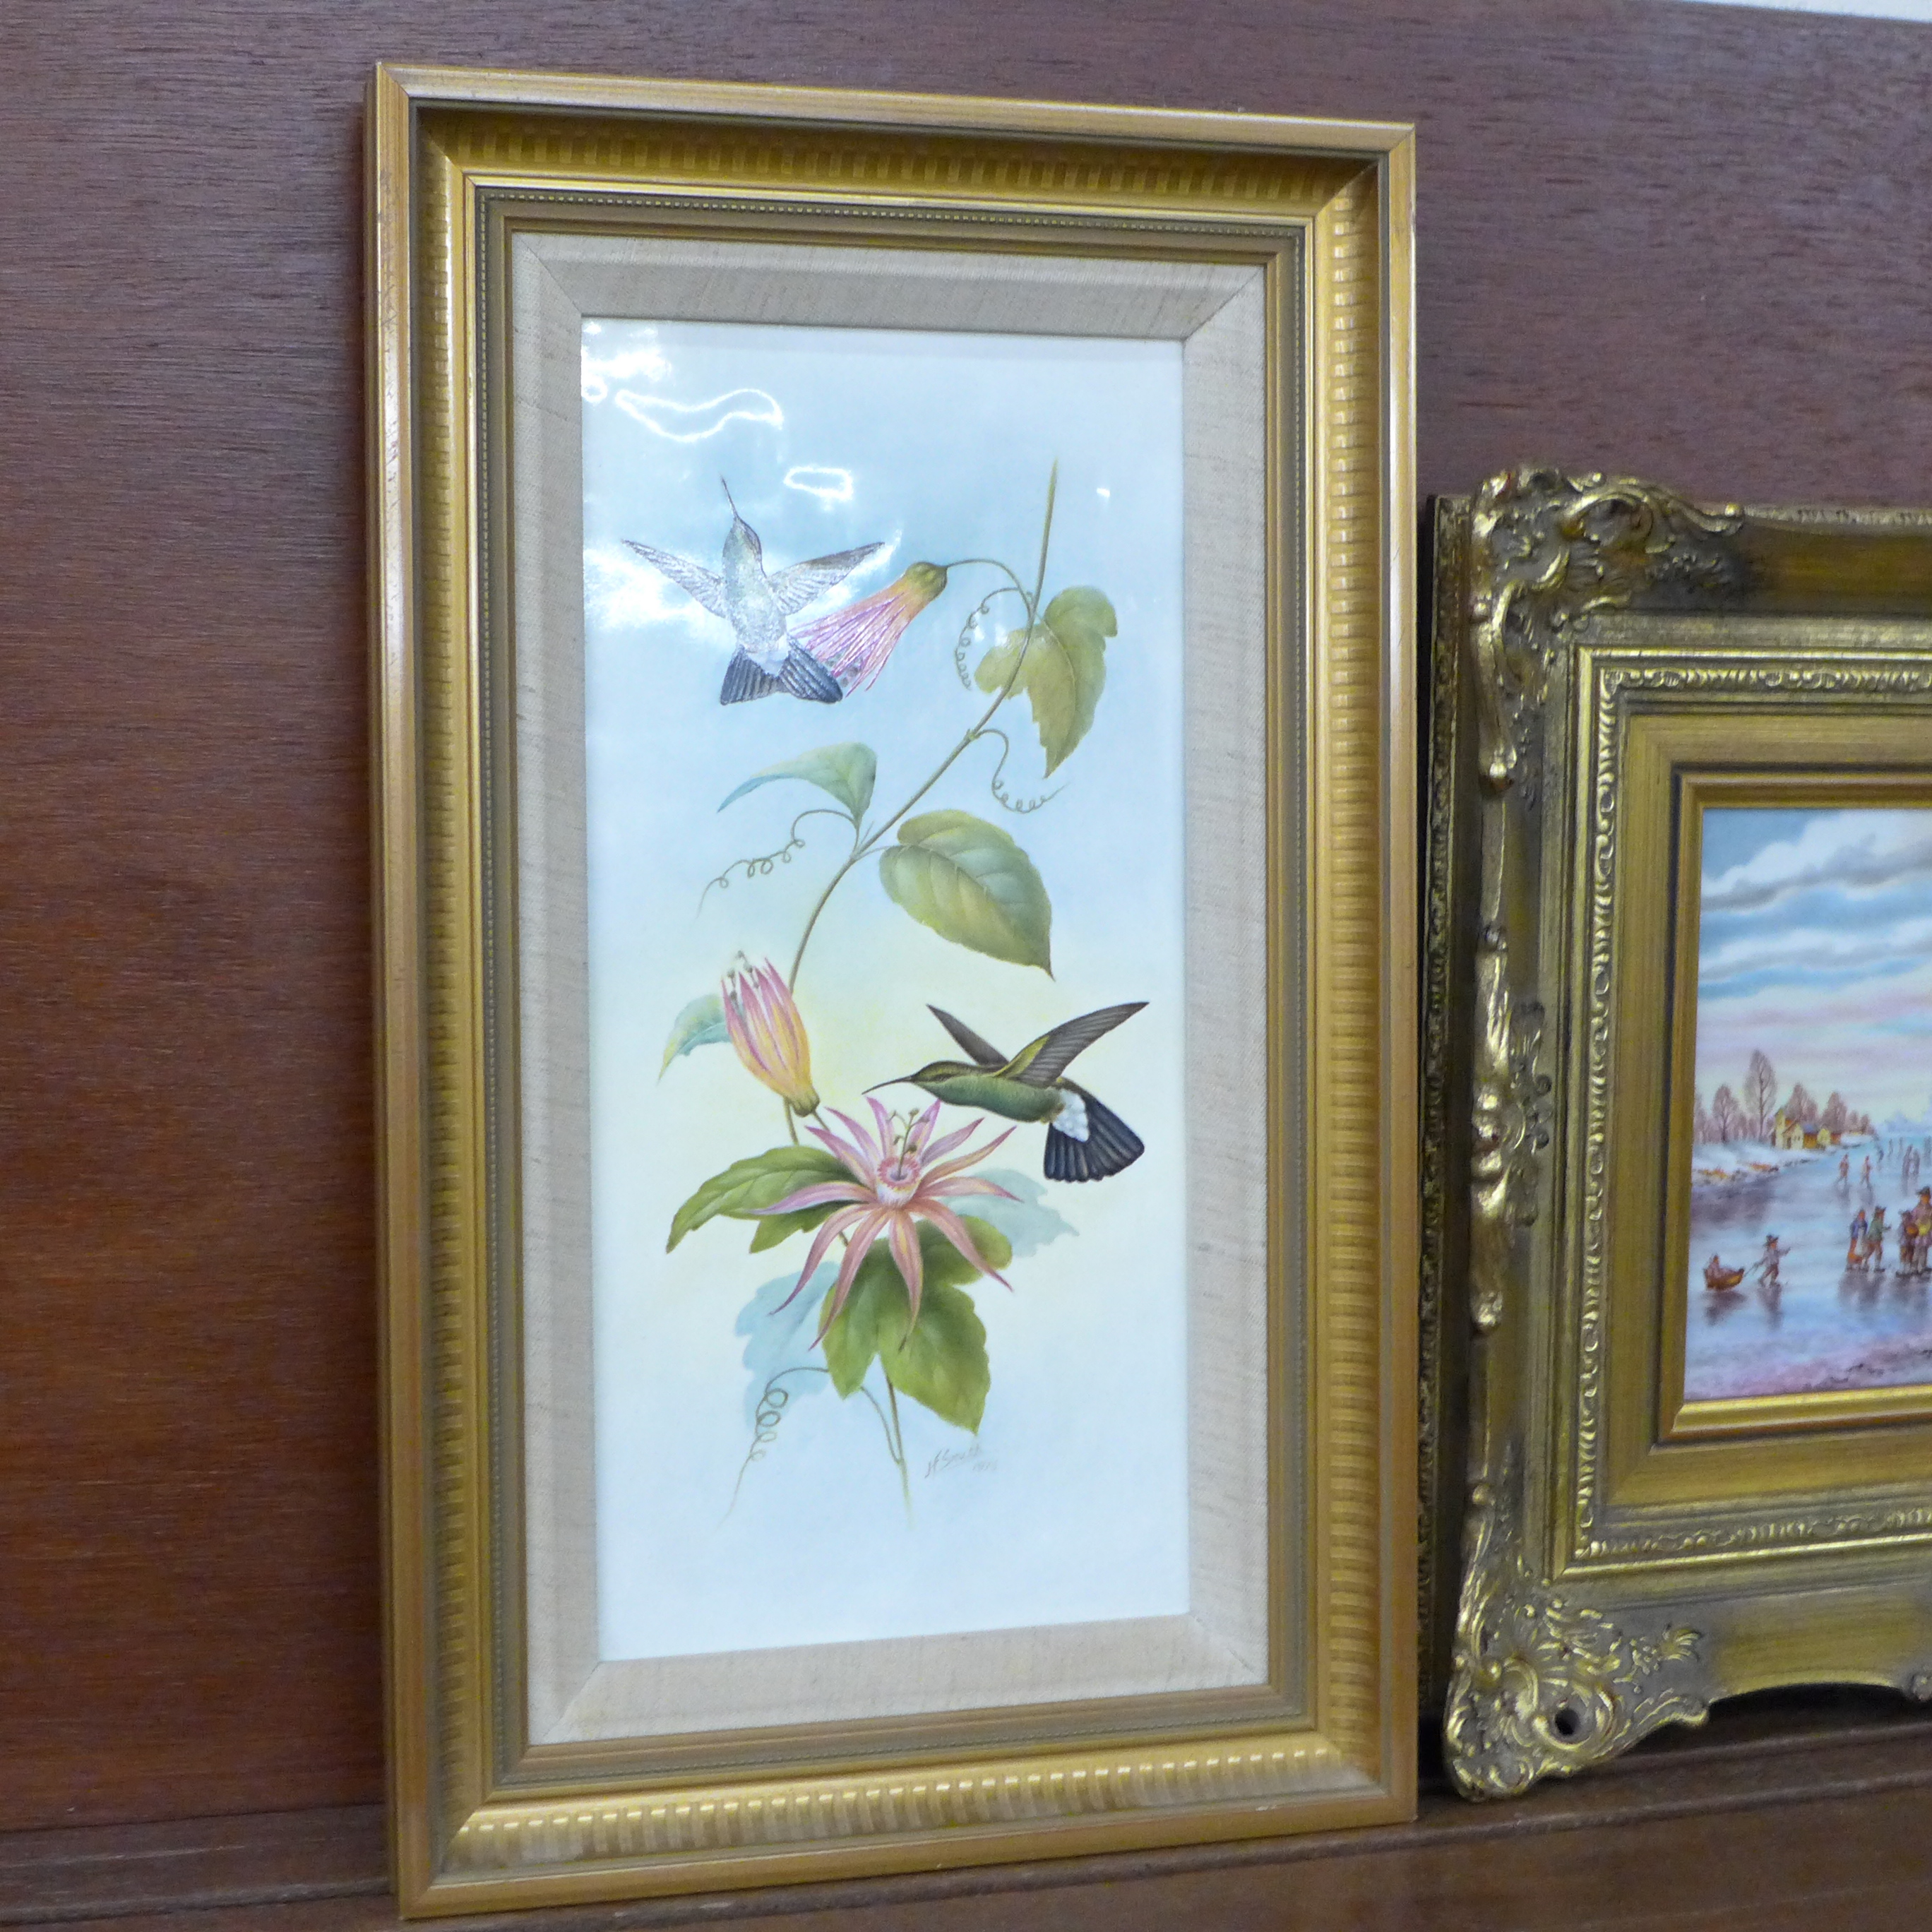 A Clermont Fine China hummingbird series ceramic plaque, signed J. Smith, 1976, a porcelain plaque - Image 2 of 6